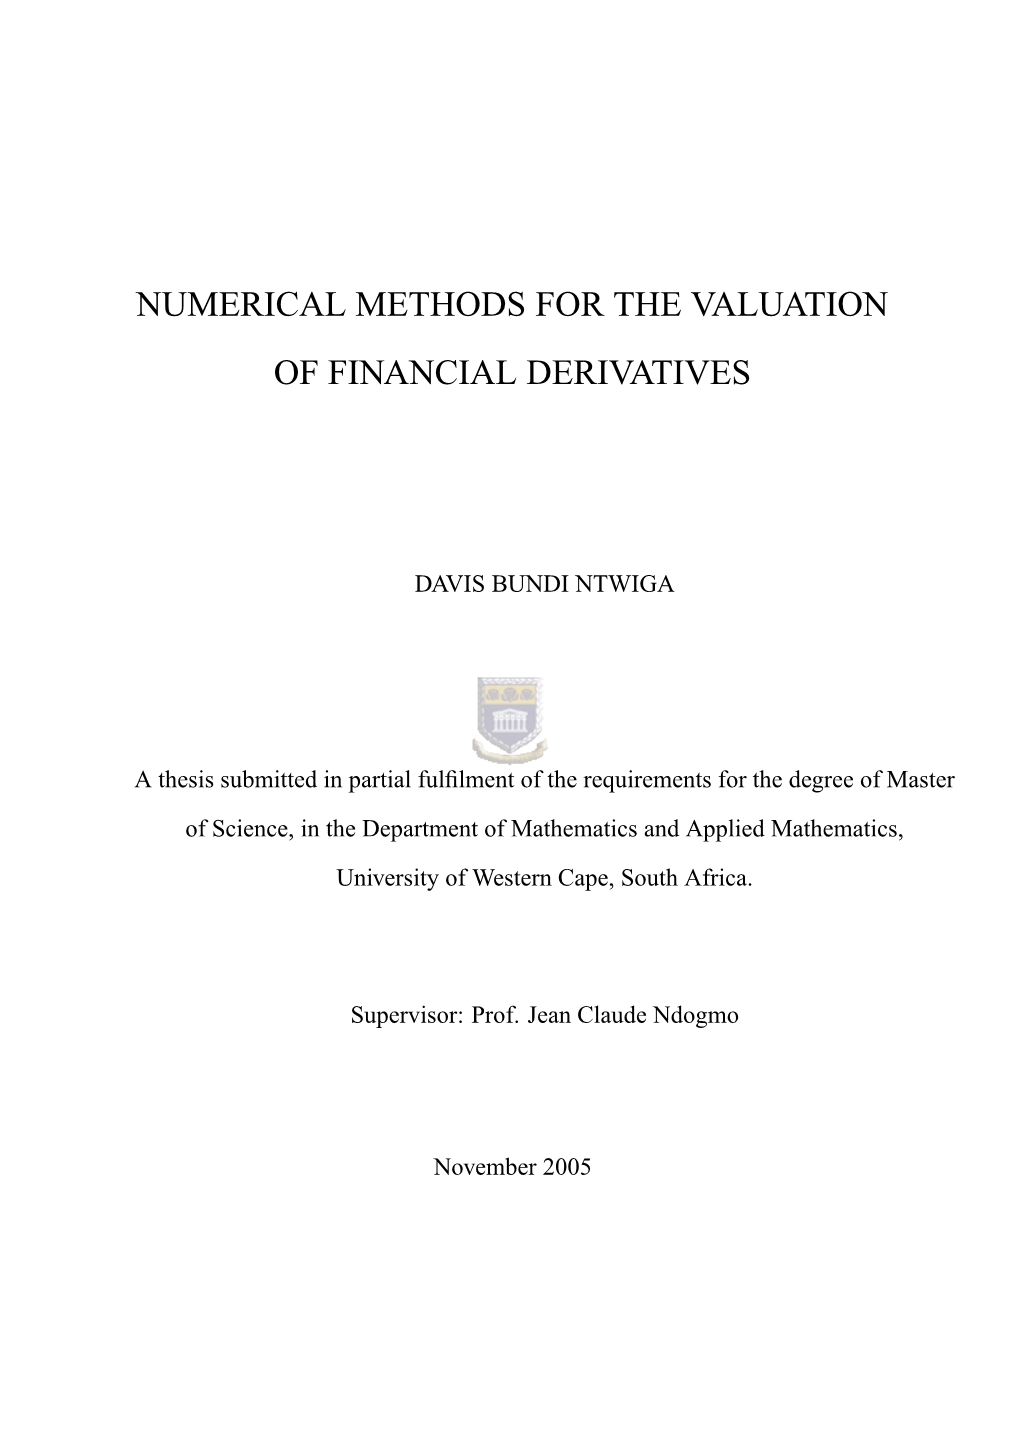 Numerical Methods for the Valuation of Financial Derivatives